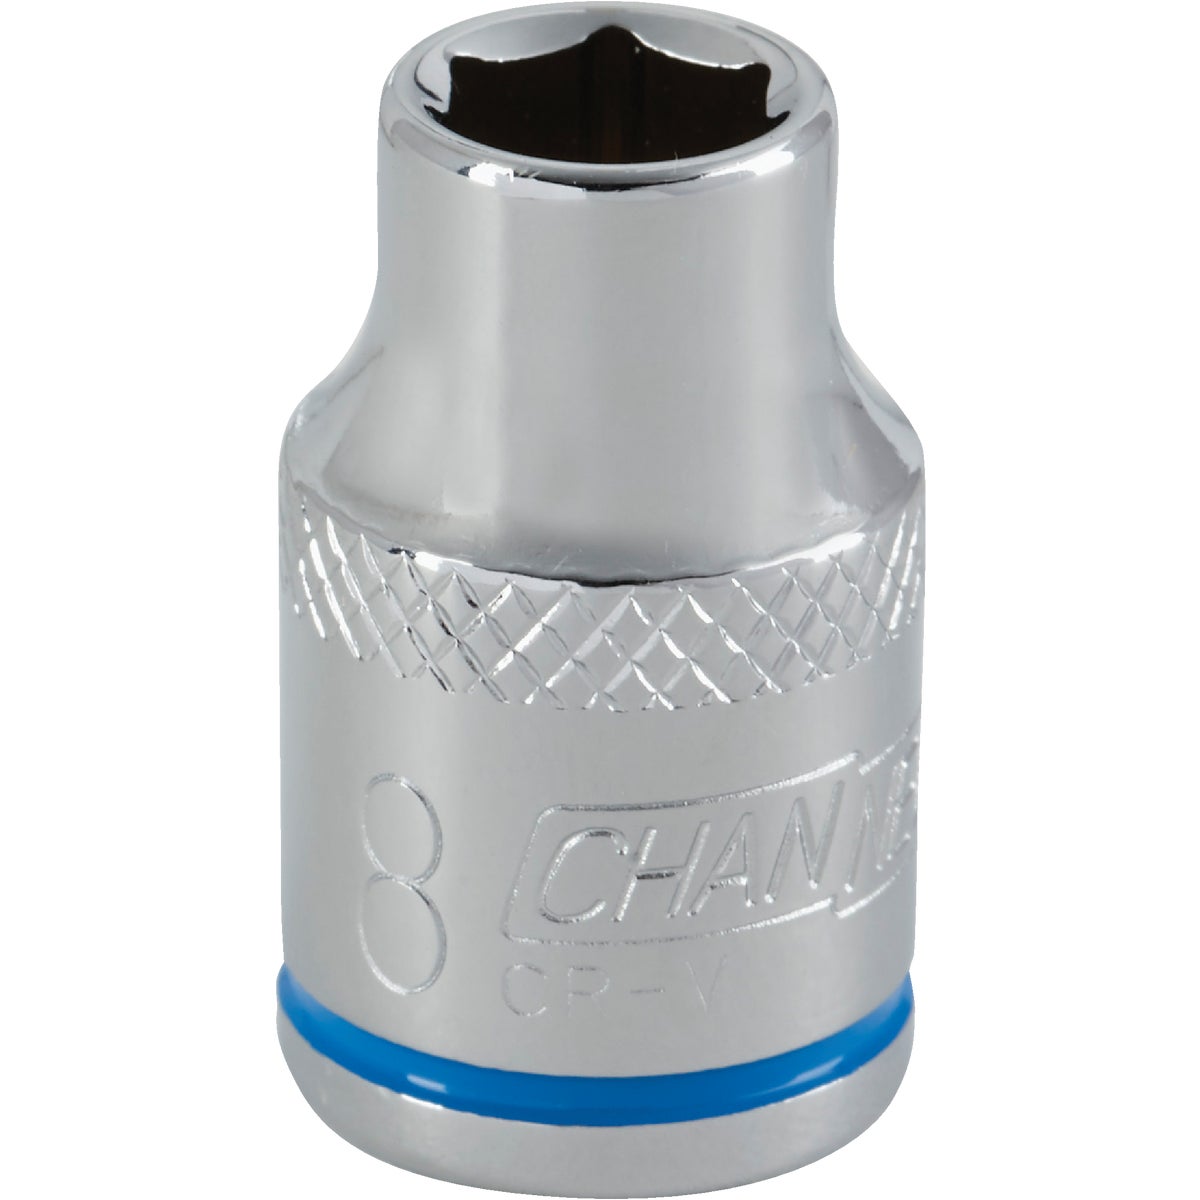 Channellock 3/8 In. Drive 8 mm 6-Point Shallow Metric Socket